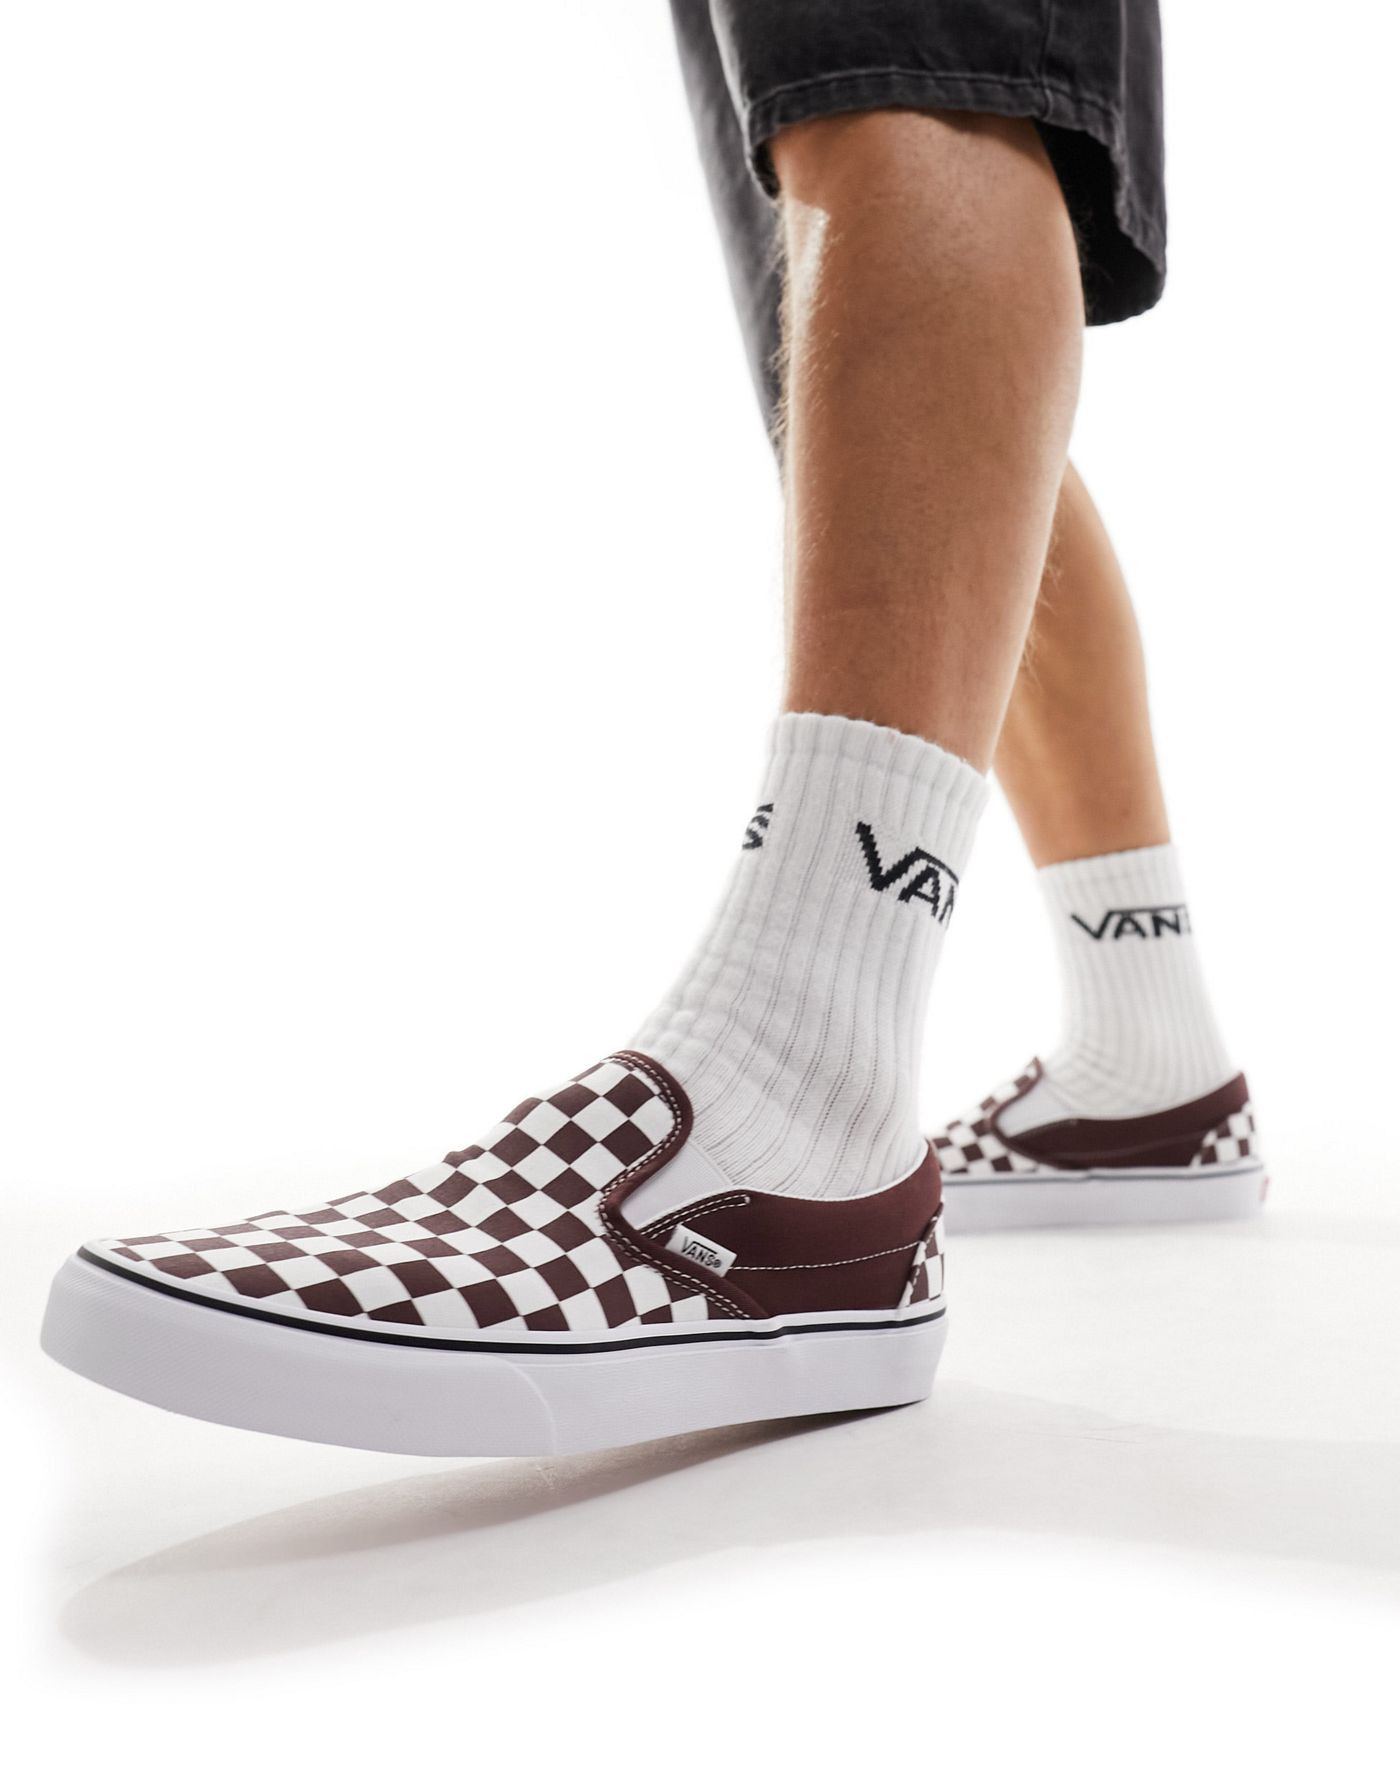 Vans slip on checkerboard sneakers in white and brown